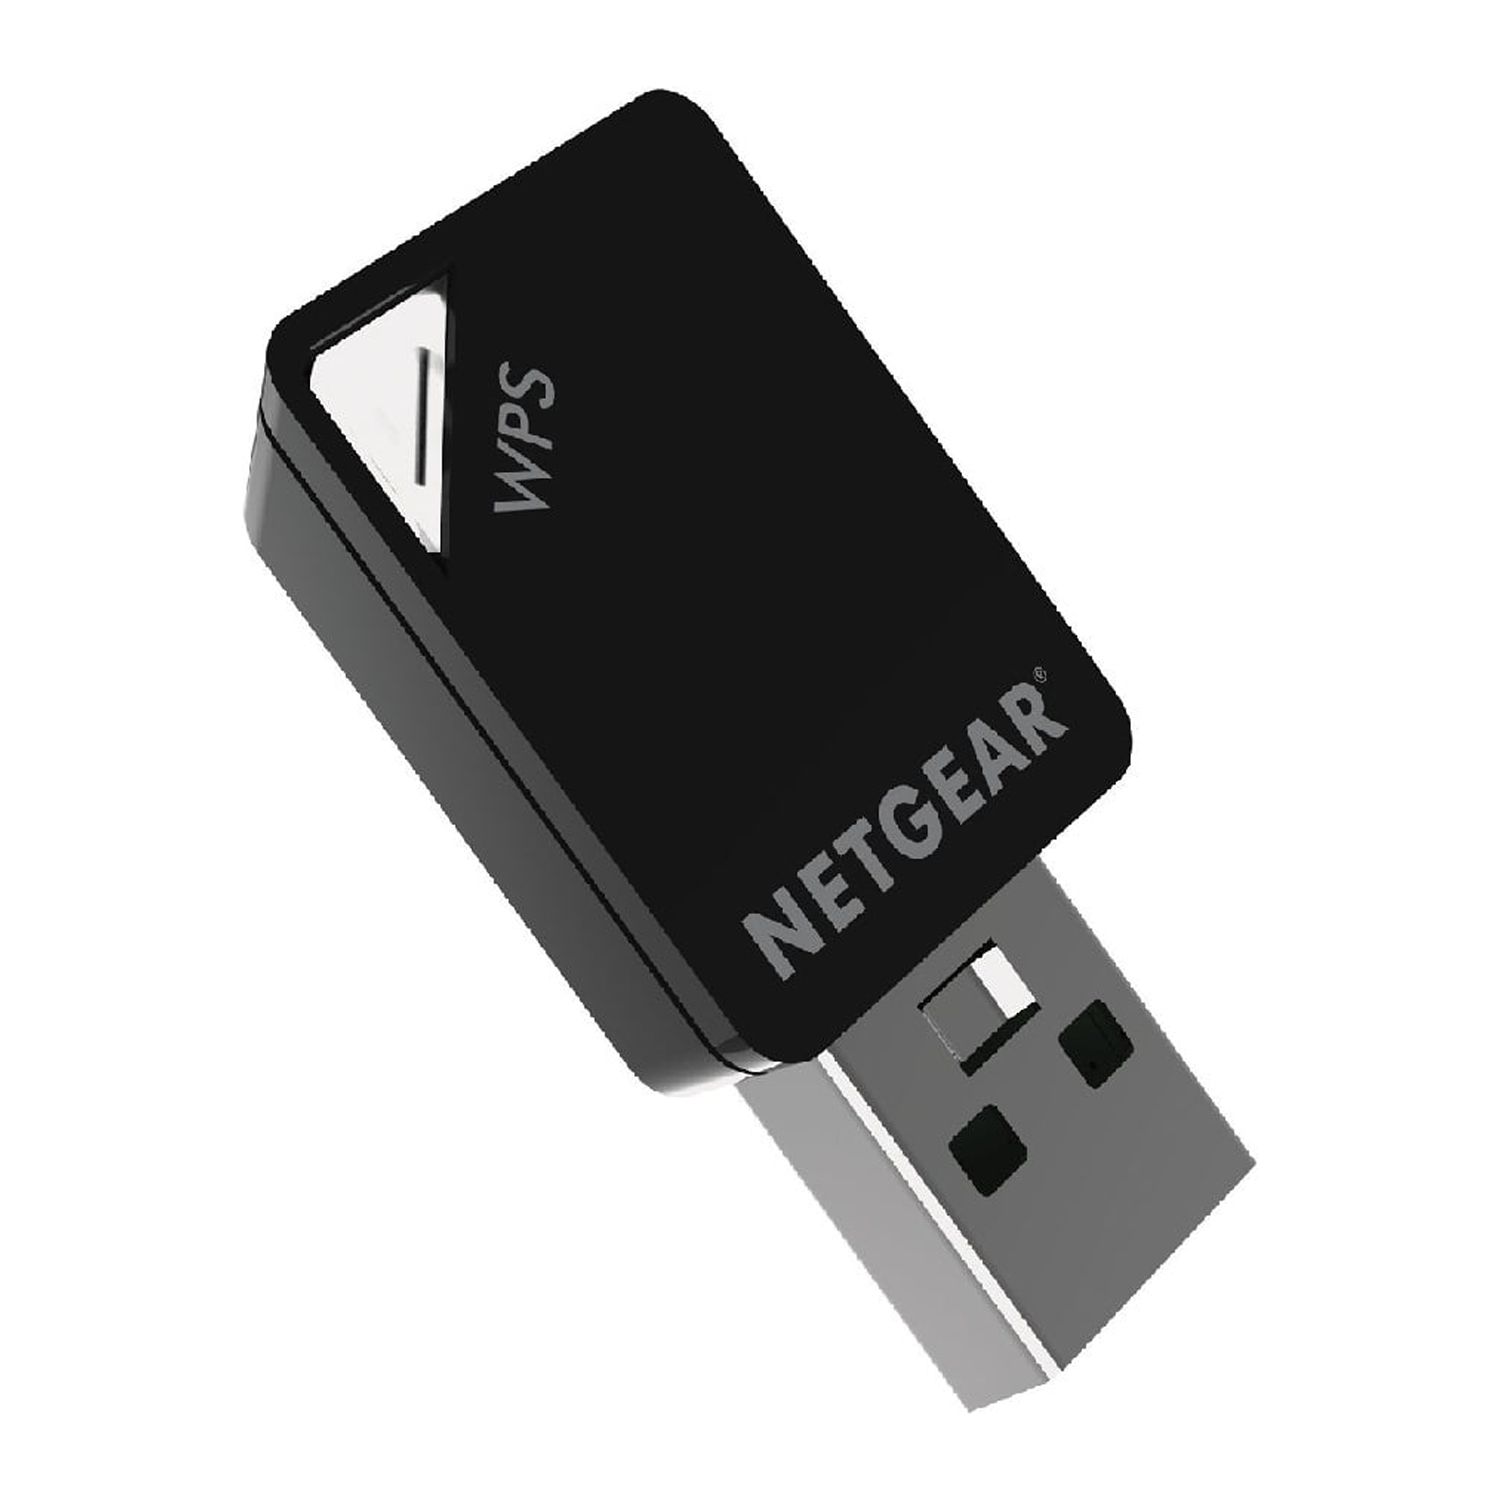 NETGEAR AC600 Dual Band WiFi USB Adapter, up to 433Mbps (A6100-10000s) - image 4 of 4